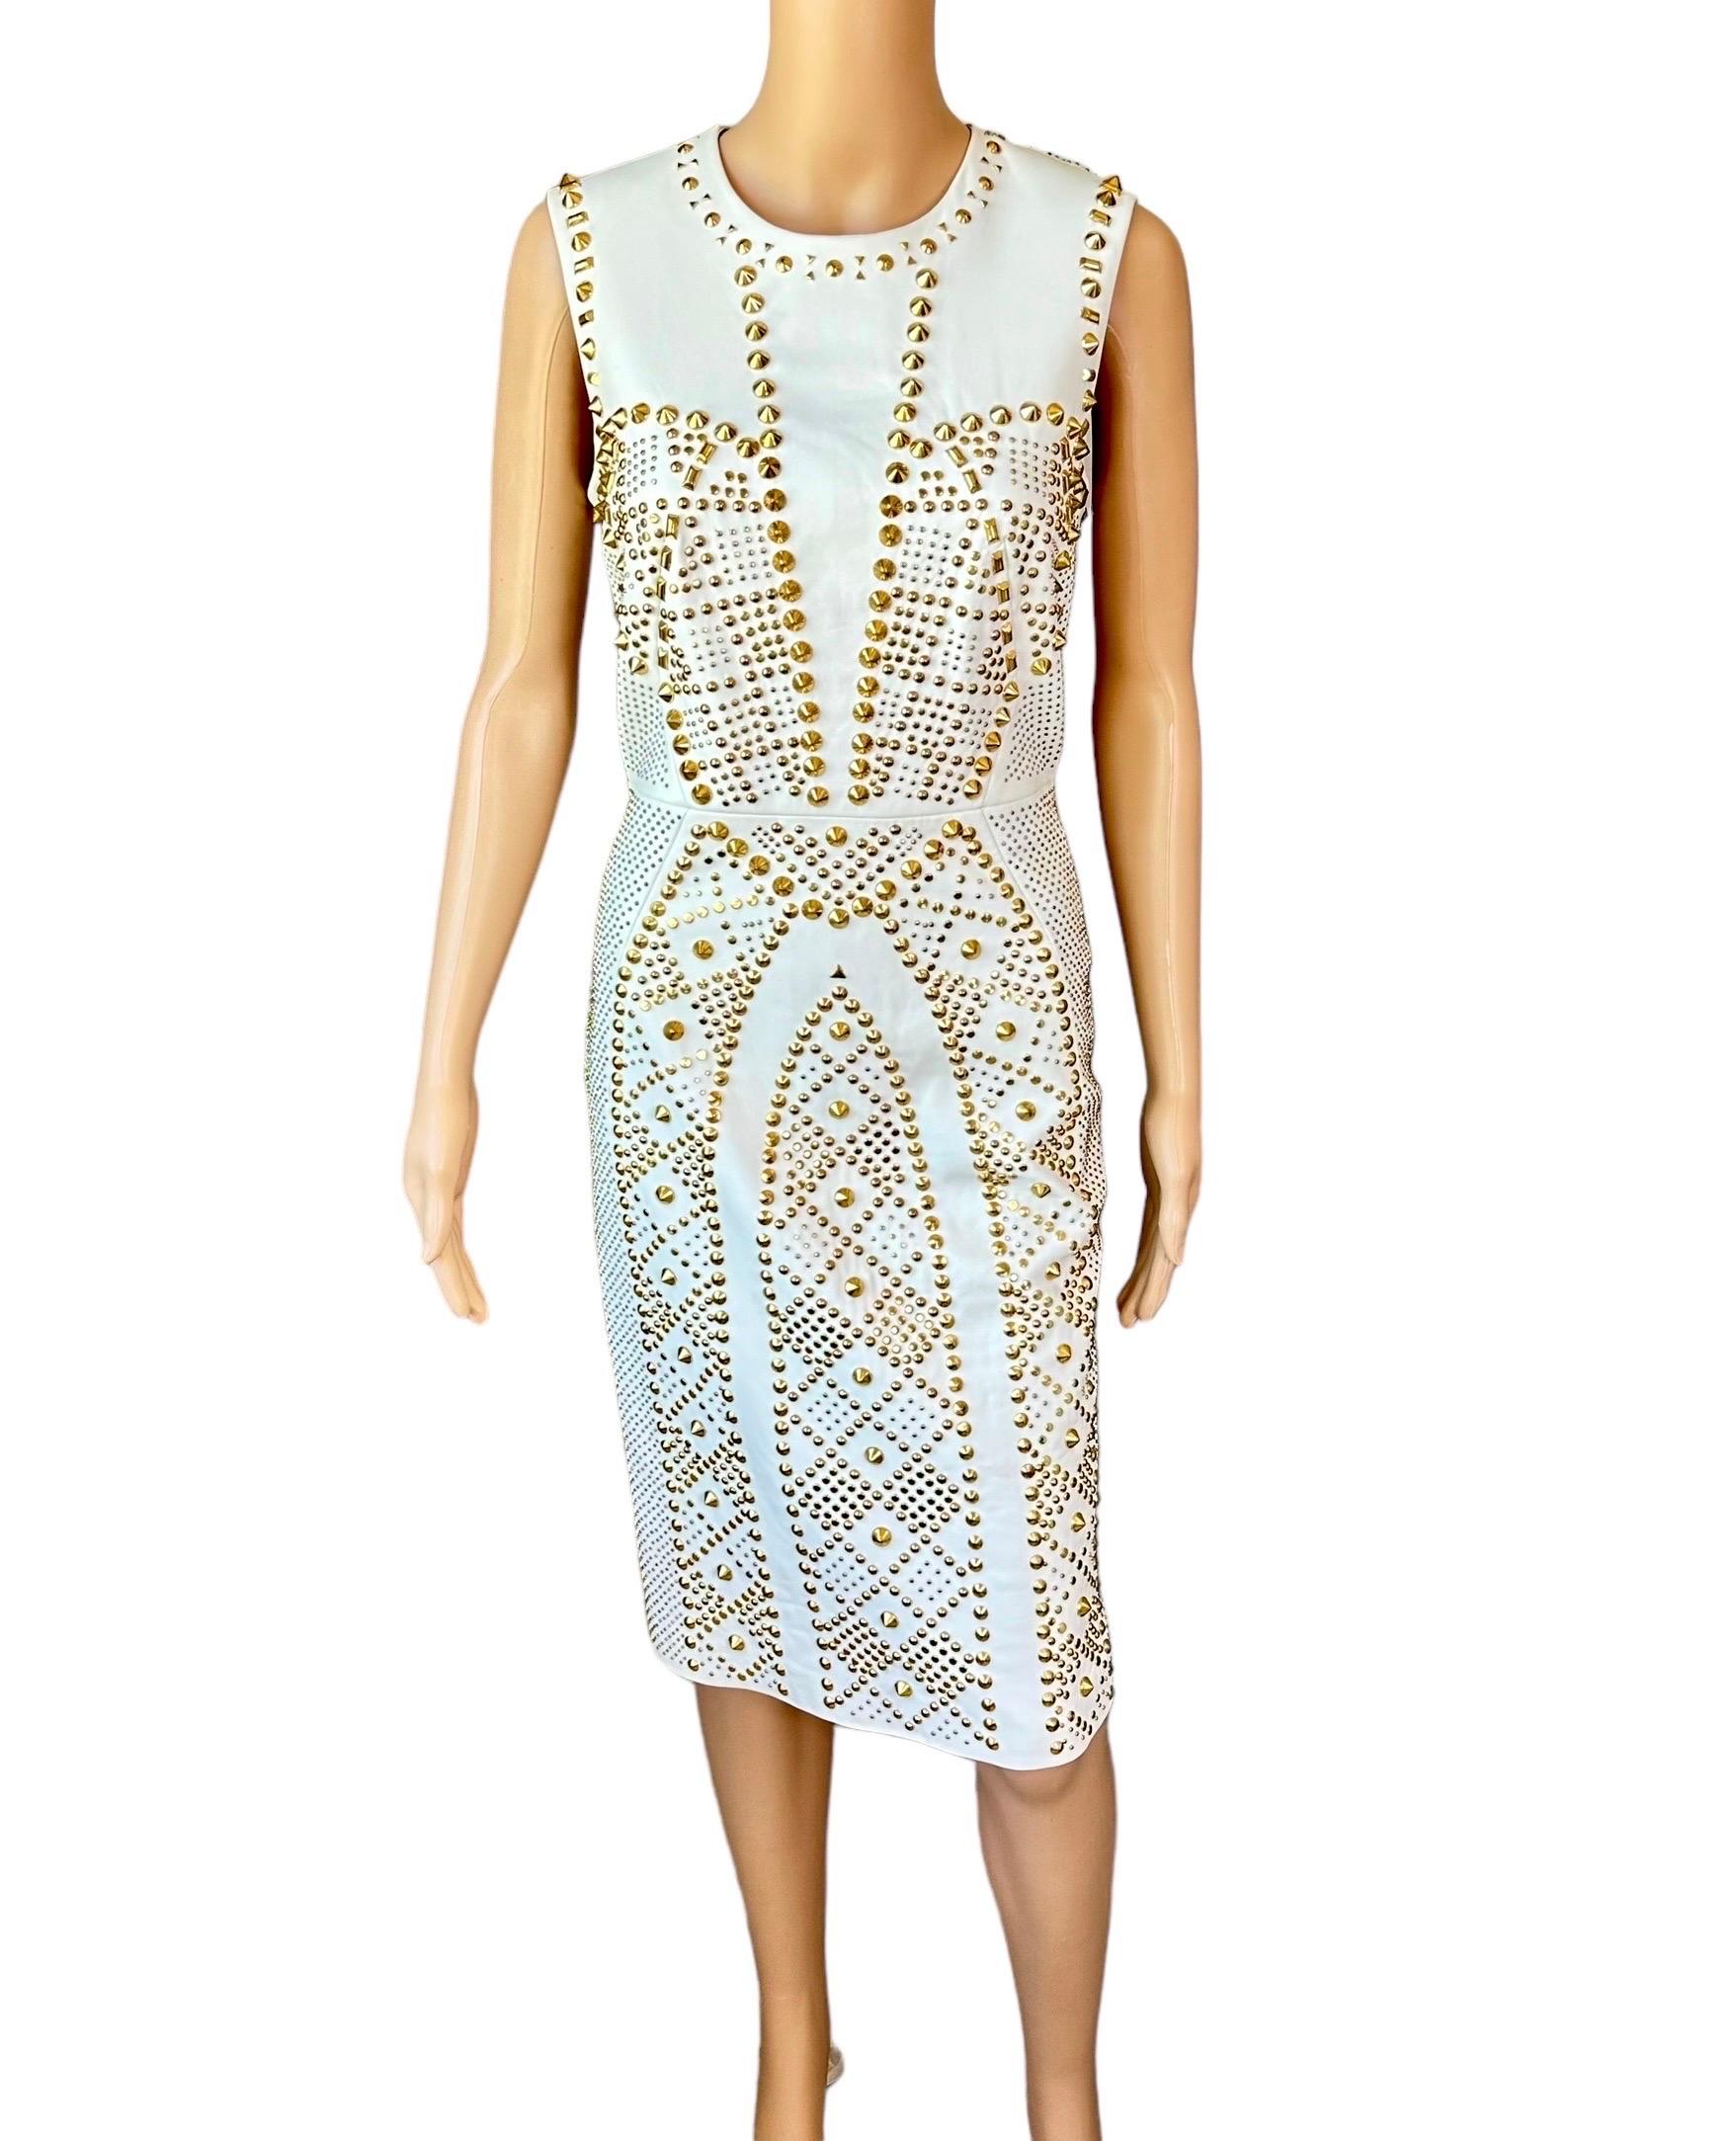 Versace S/S 2012 Runway Embellished Gold Studded Ivory Leather Dress  For Sale 2